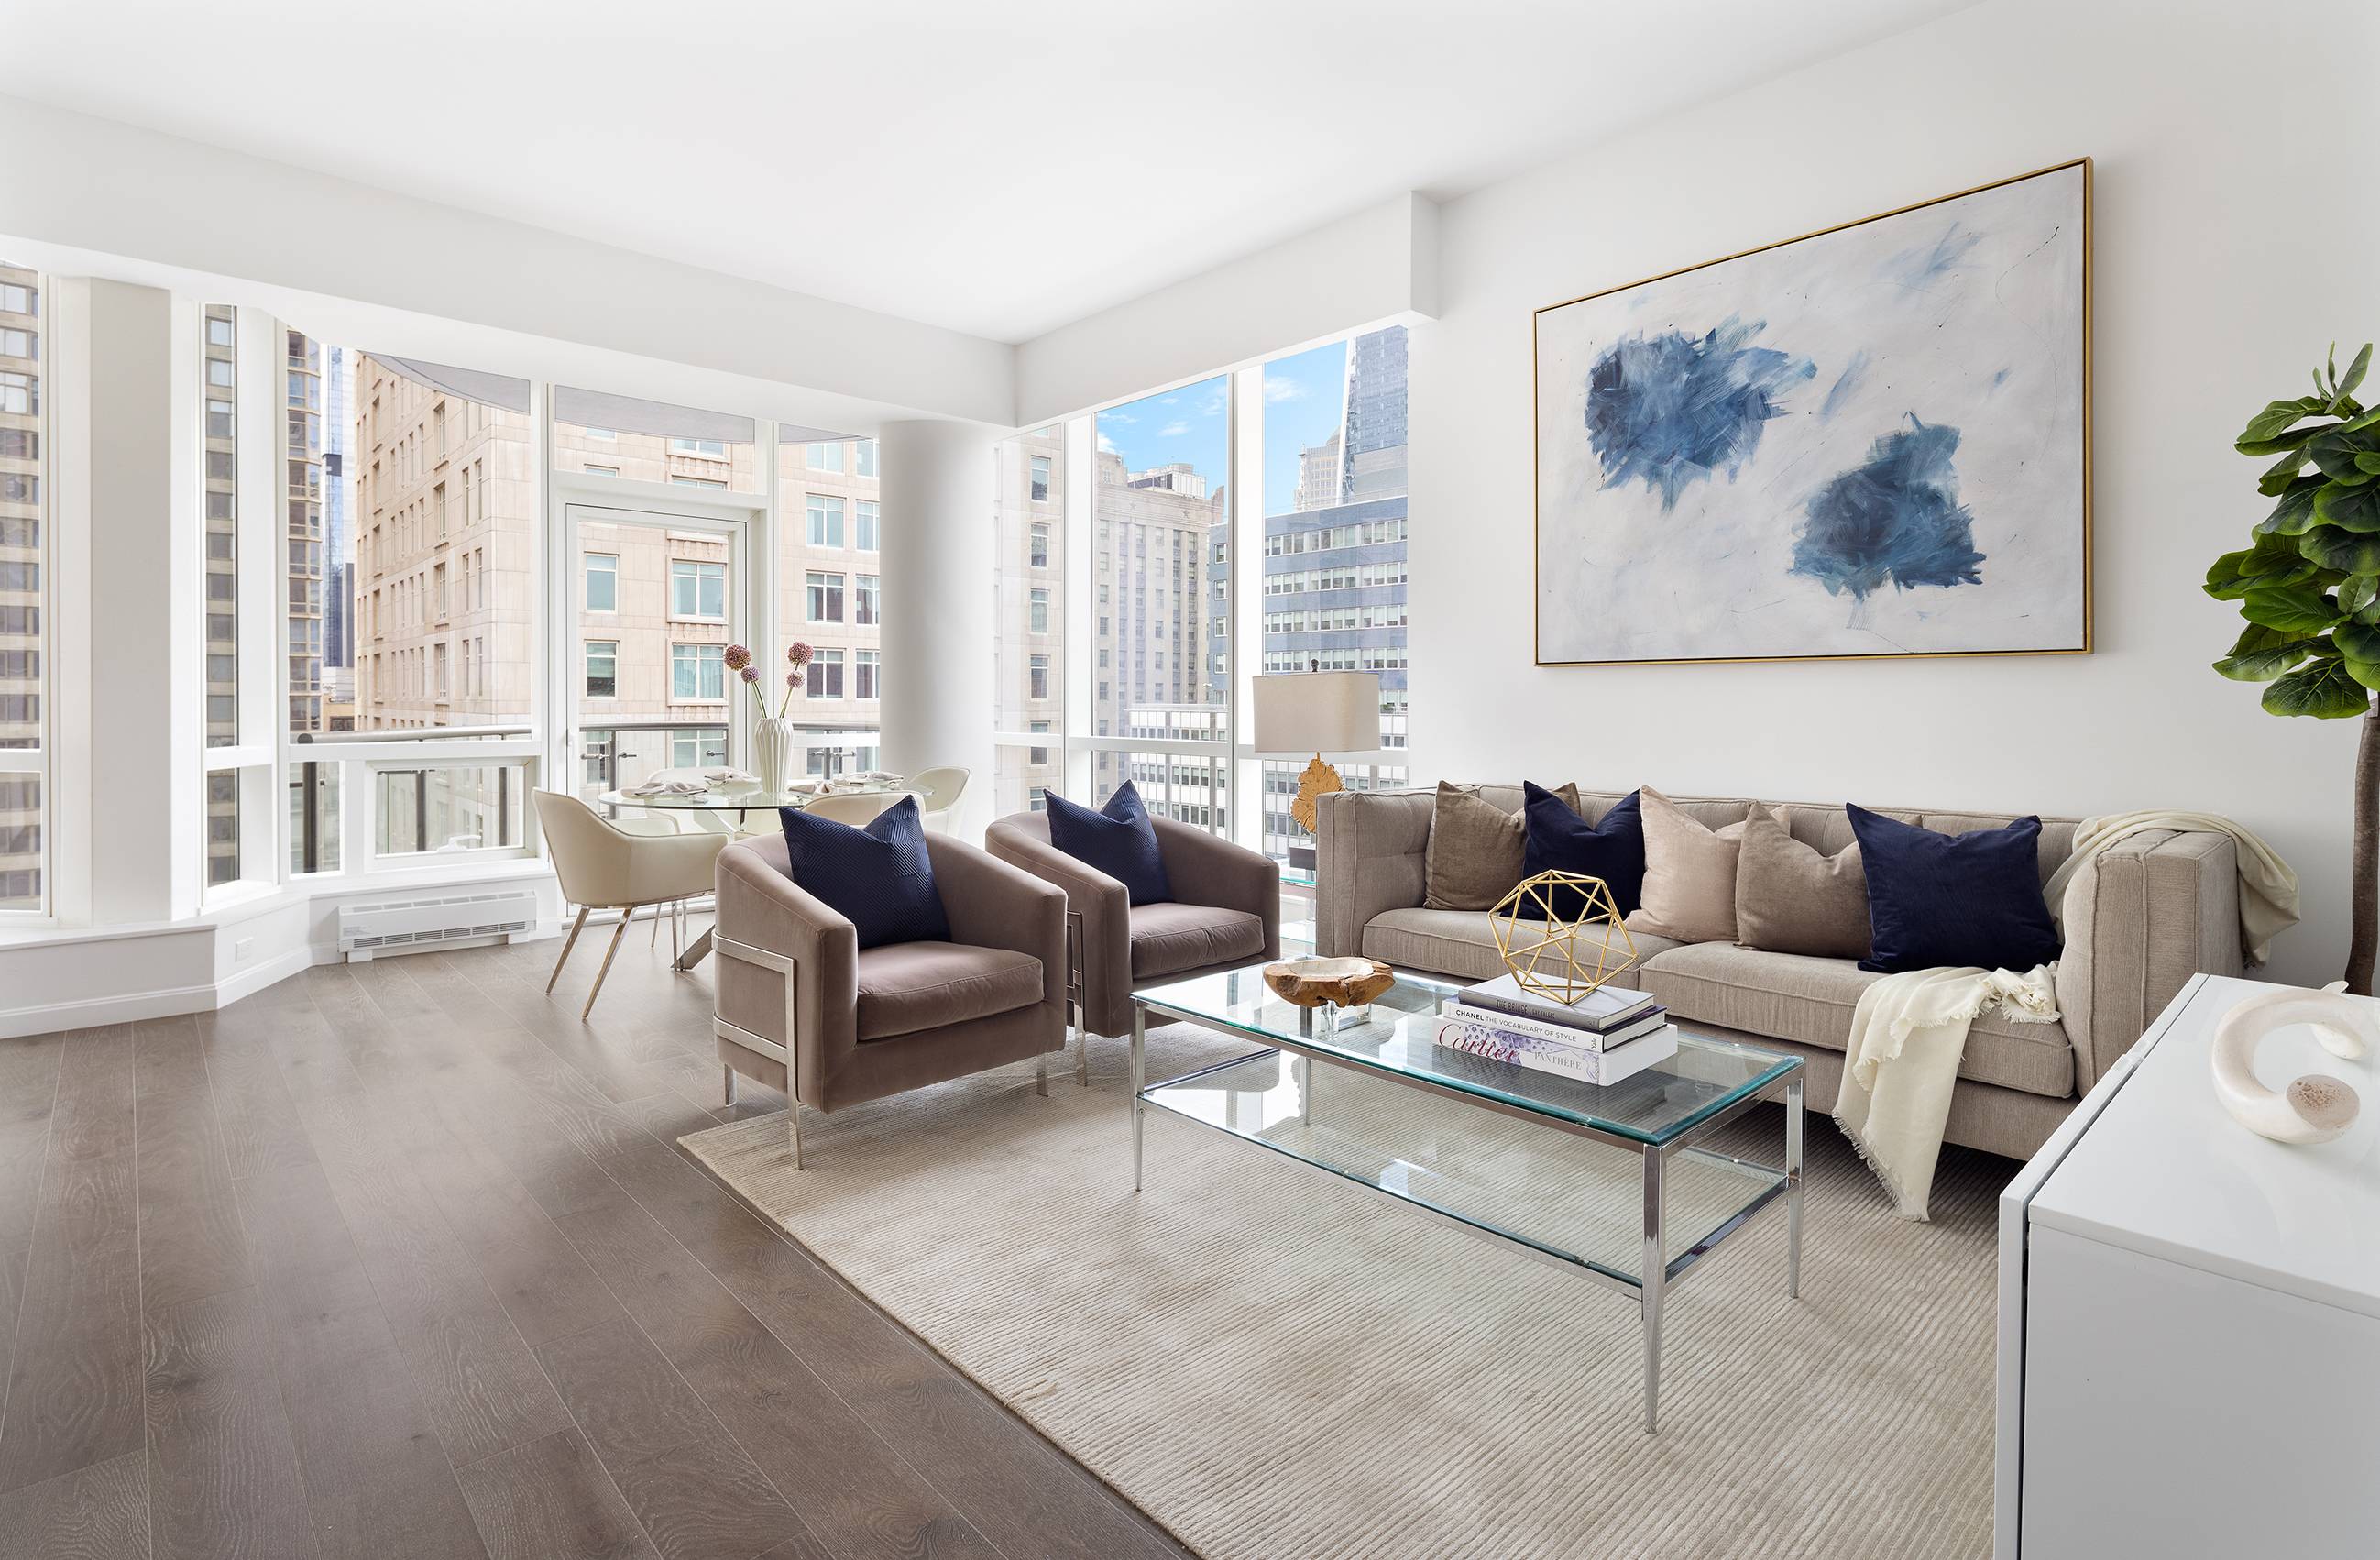 Welcome to this gleaming full floor loft at TriBeCa's newest luxury tower, a stunning 3 bedroom, 3 bathroom home suffused with Lower Manhattan views and northern and southern light.